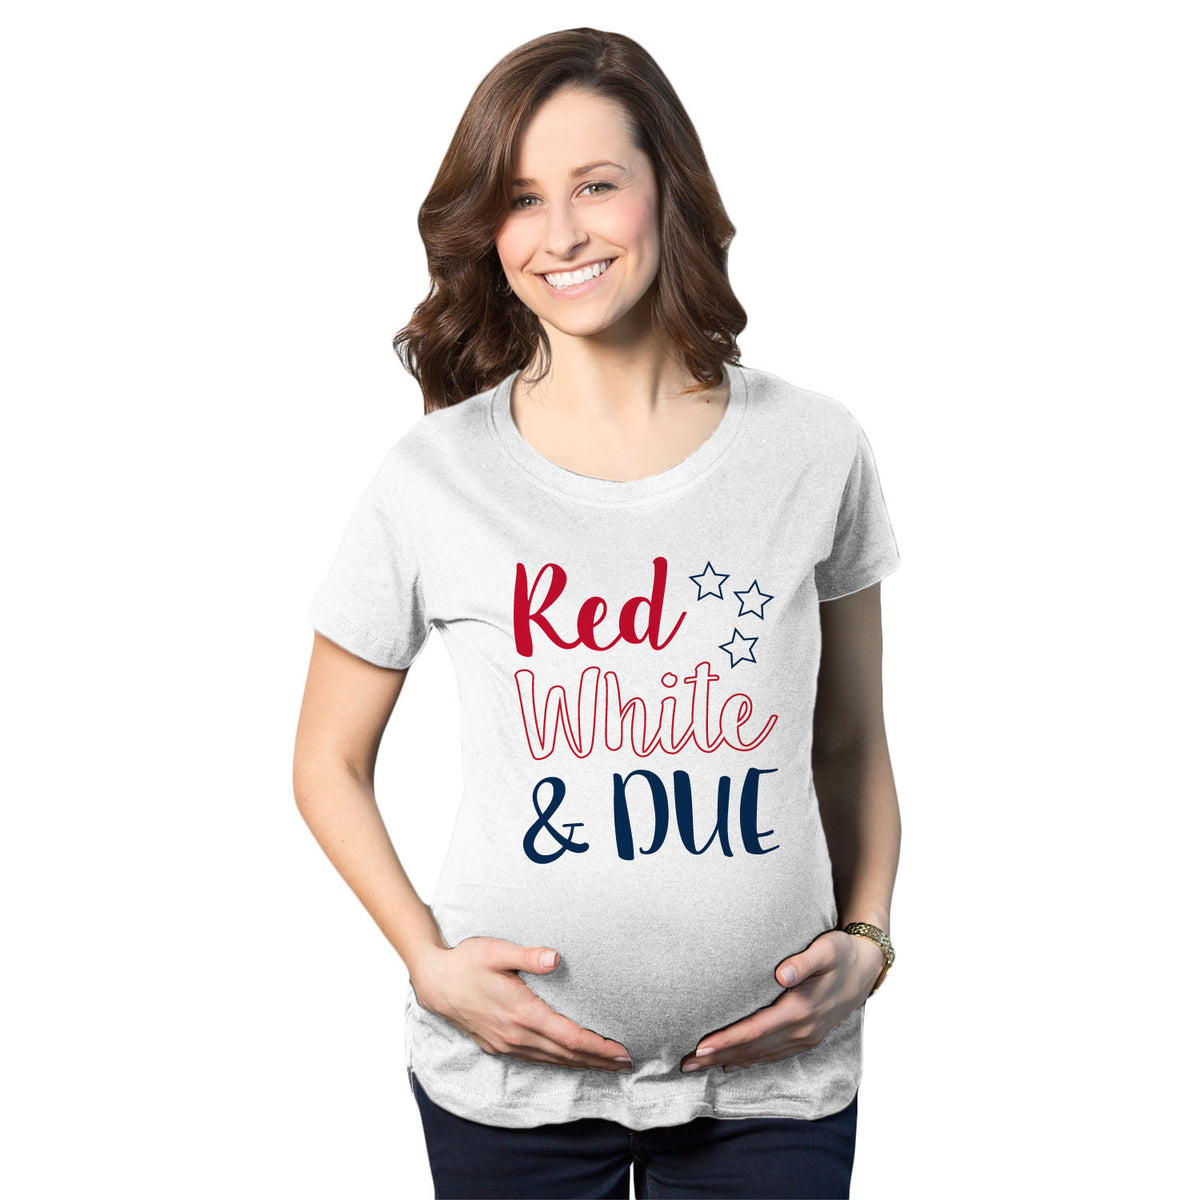 Funny White Red White And Due Maternity T Shirt Nerdy Fourth of July Tee